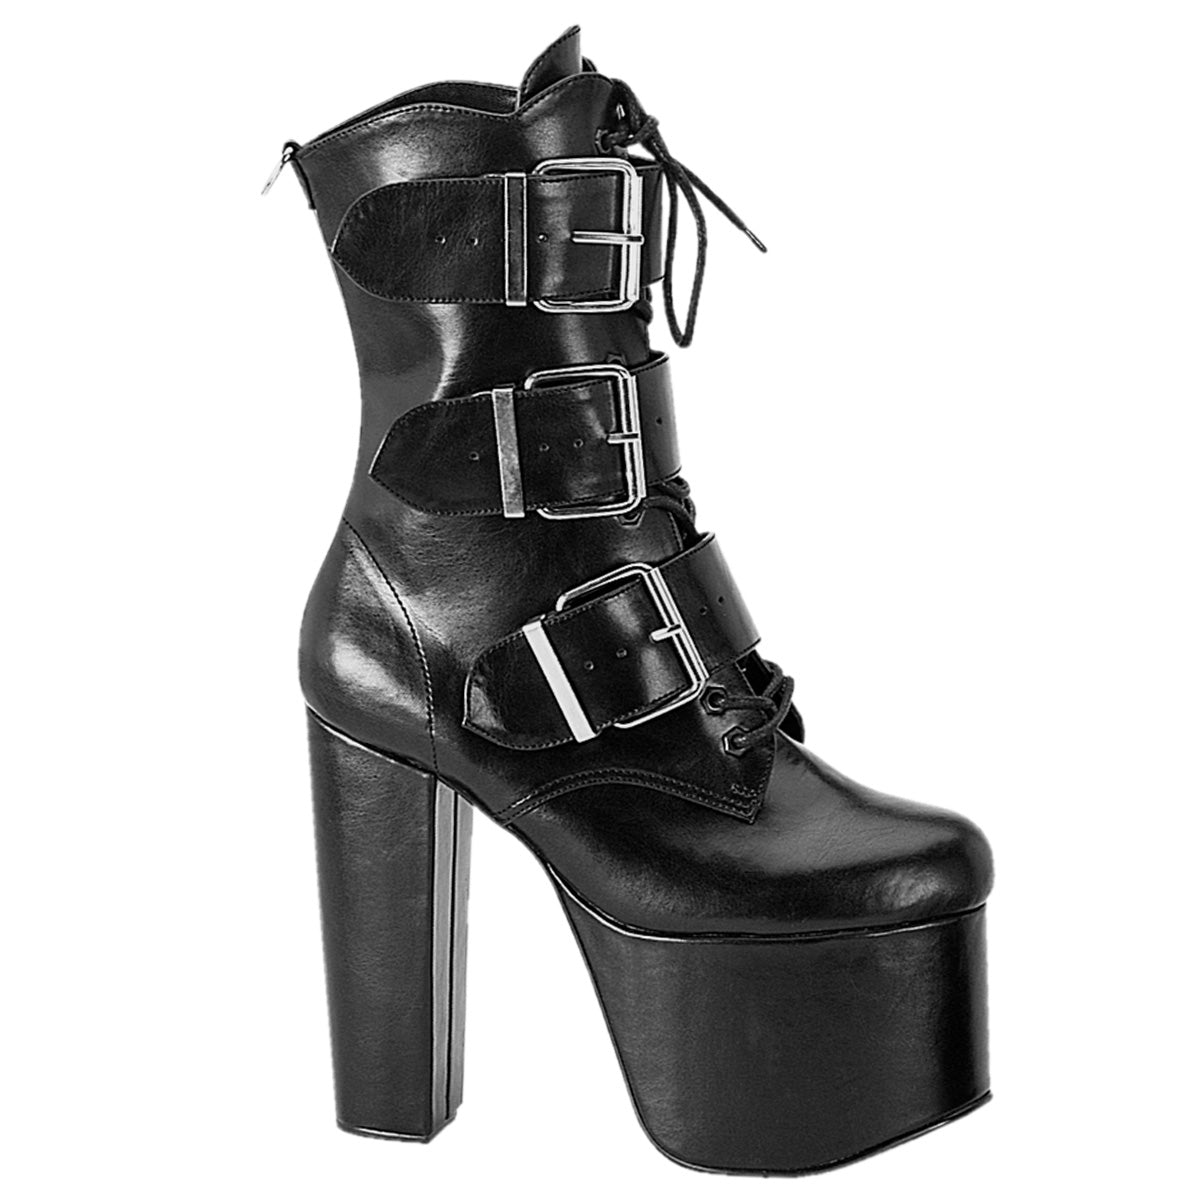 DemoniaCult TORMENT 703 - From DemoniaCult Sold By Alternative Footwear